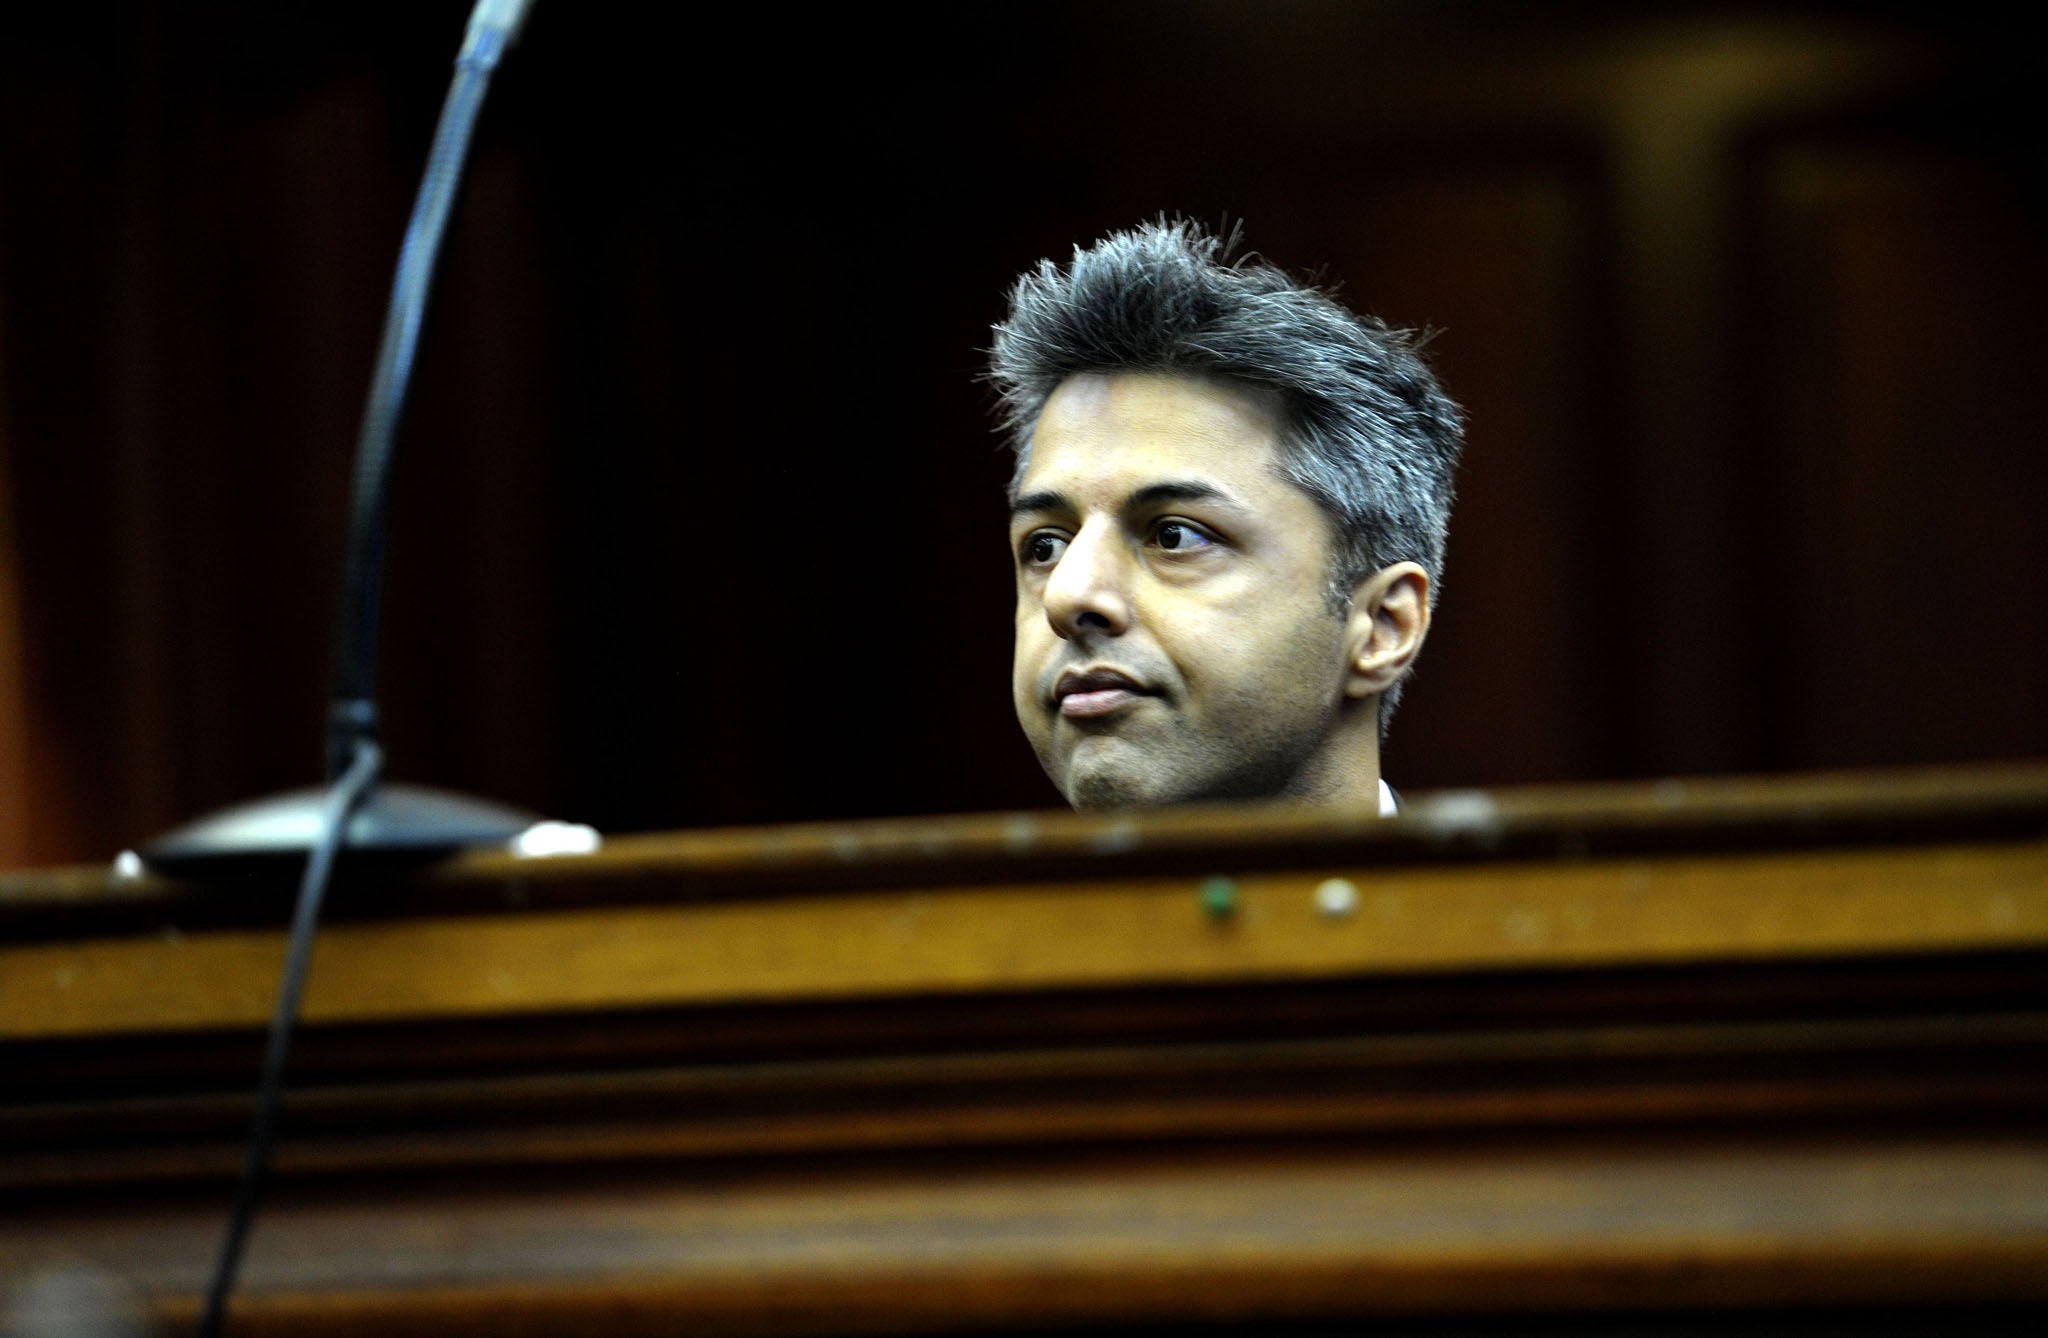 Shrien Dewani broke down in tears as graphic footage and images of his wife's dead body were shown in a South African court